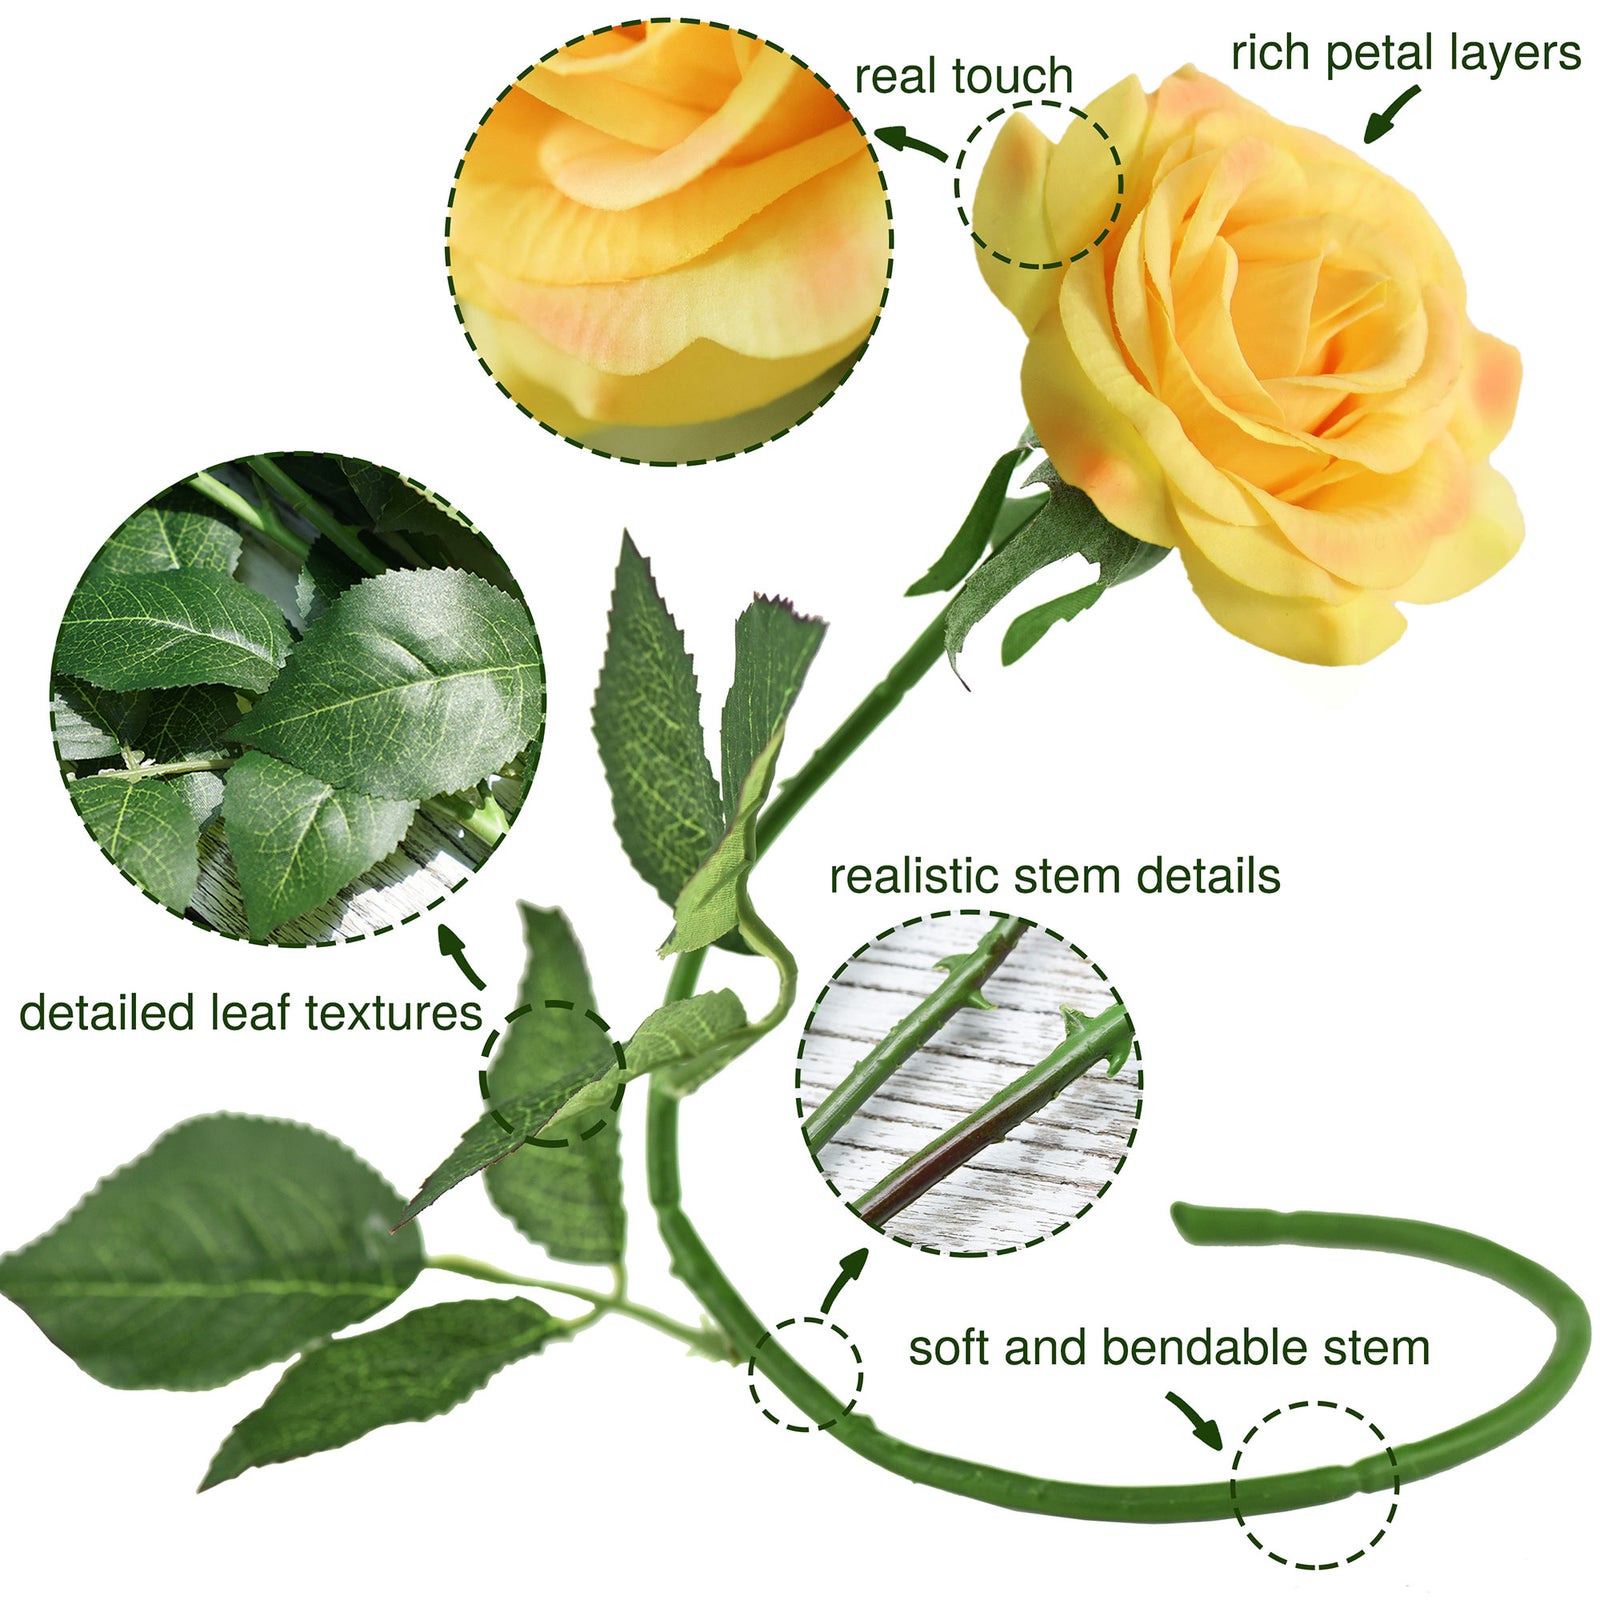 Sun Yellow Real Touch Silk Artificial Flowers ‘Petals Feel and Look like Fresh Roses 10 Stems